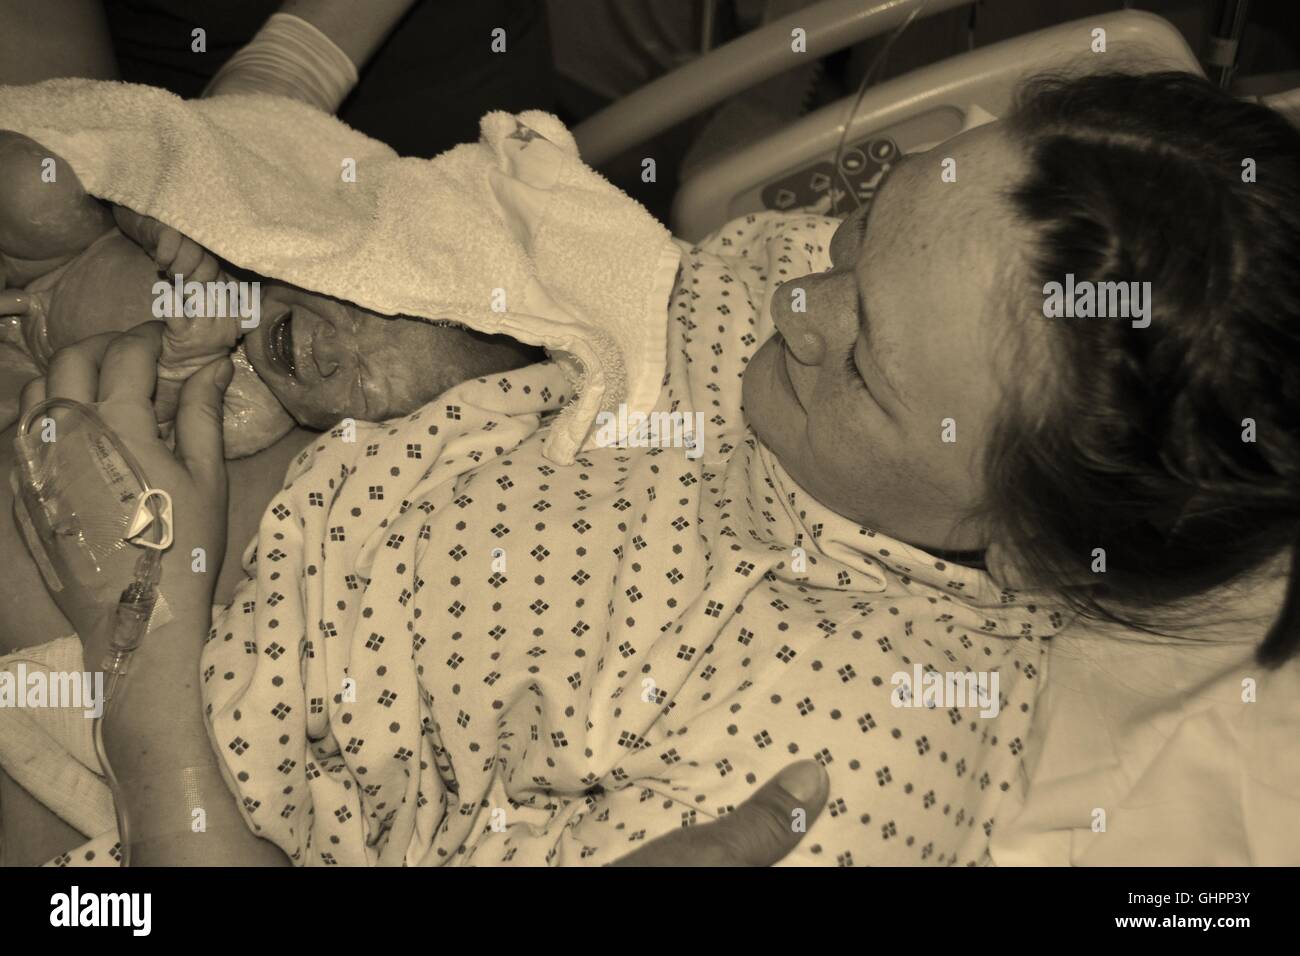 New born baby and mother in hospital bed Banque D'Images